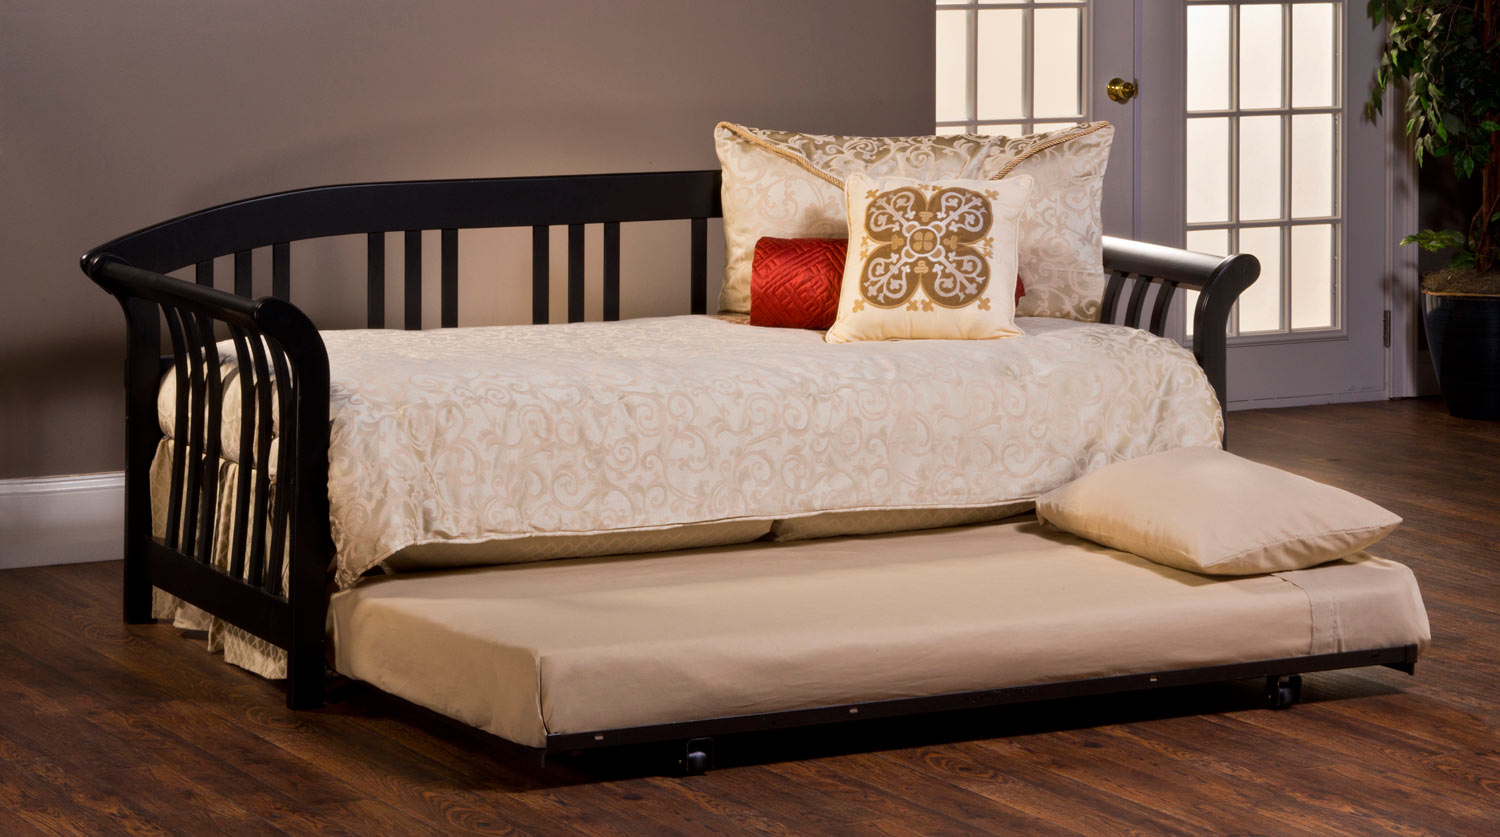 Hillsdale Dorchester Daybed with Suspension Deck and Trundle - Black